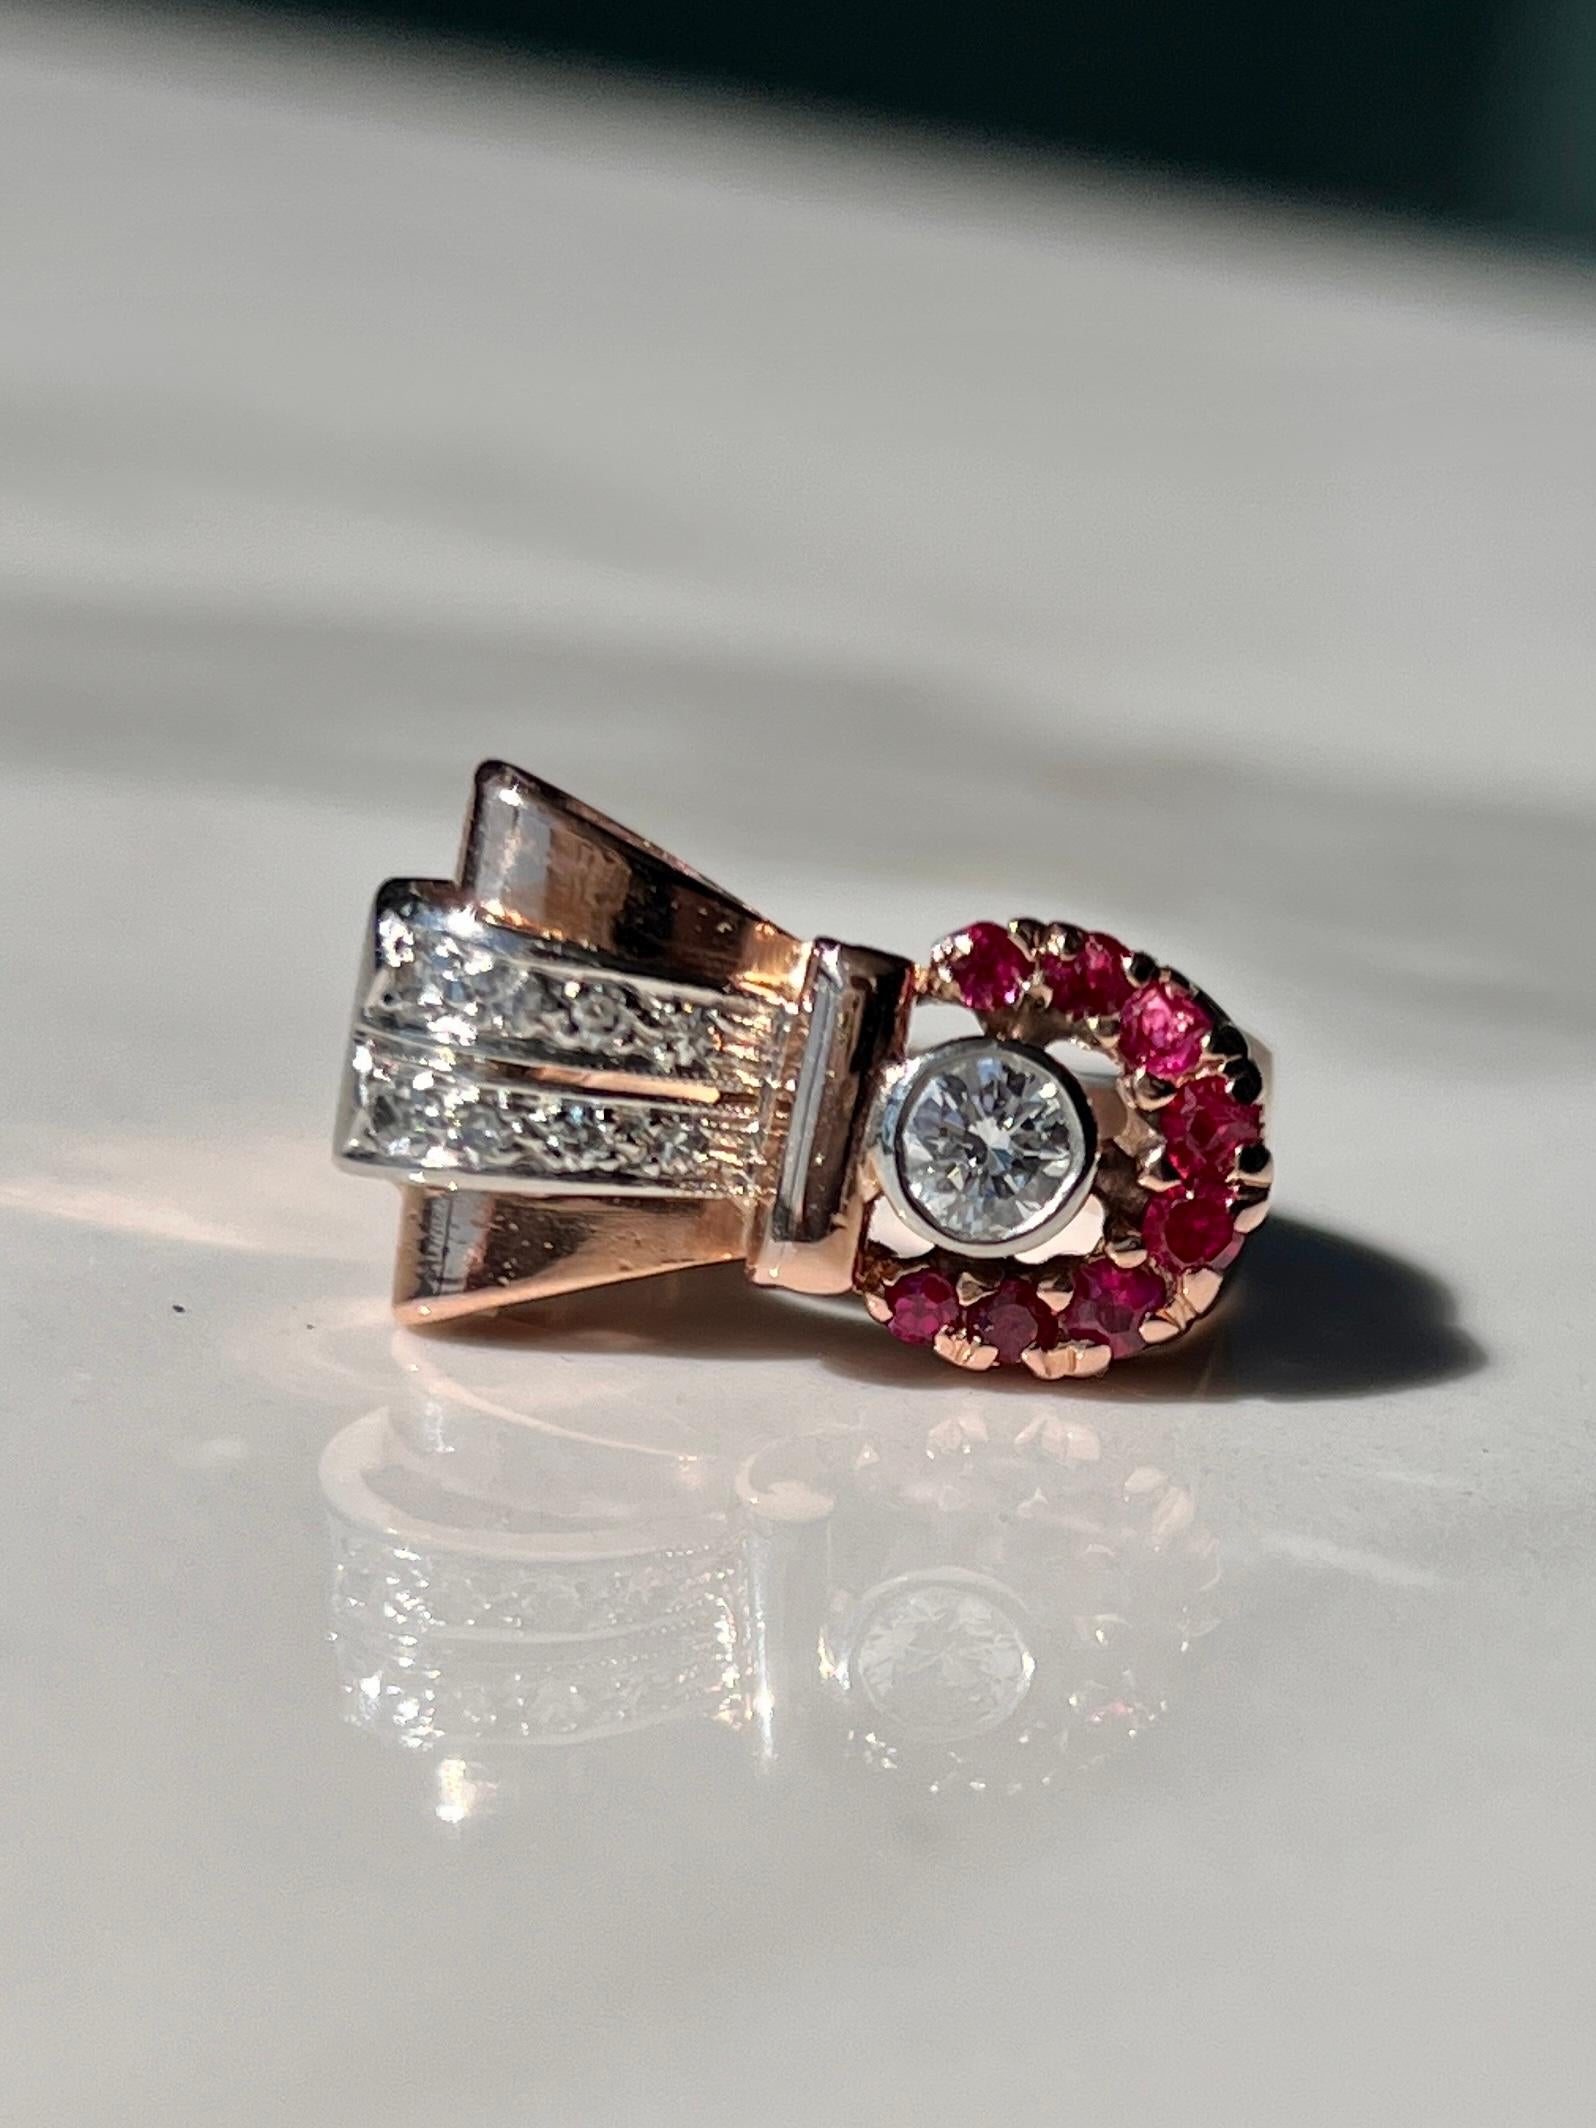 The classic style of Circa 60-70''s was this round ruby and diamond bow style cocktail ring. Handmade in solid rose gold and set with natural rubies & diamonds.

This is an authentic bespoke vintage piece and cannot be recreated.

Material: 14kt